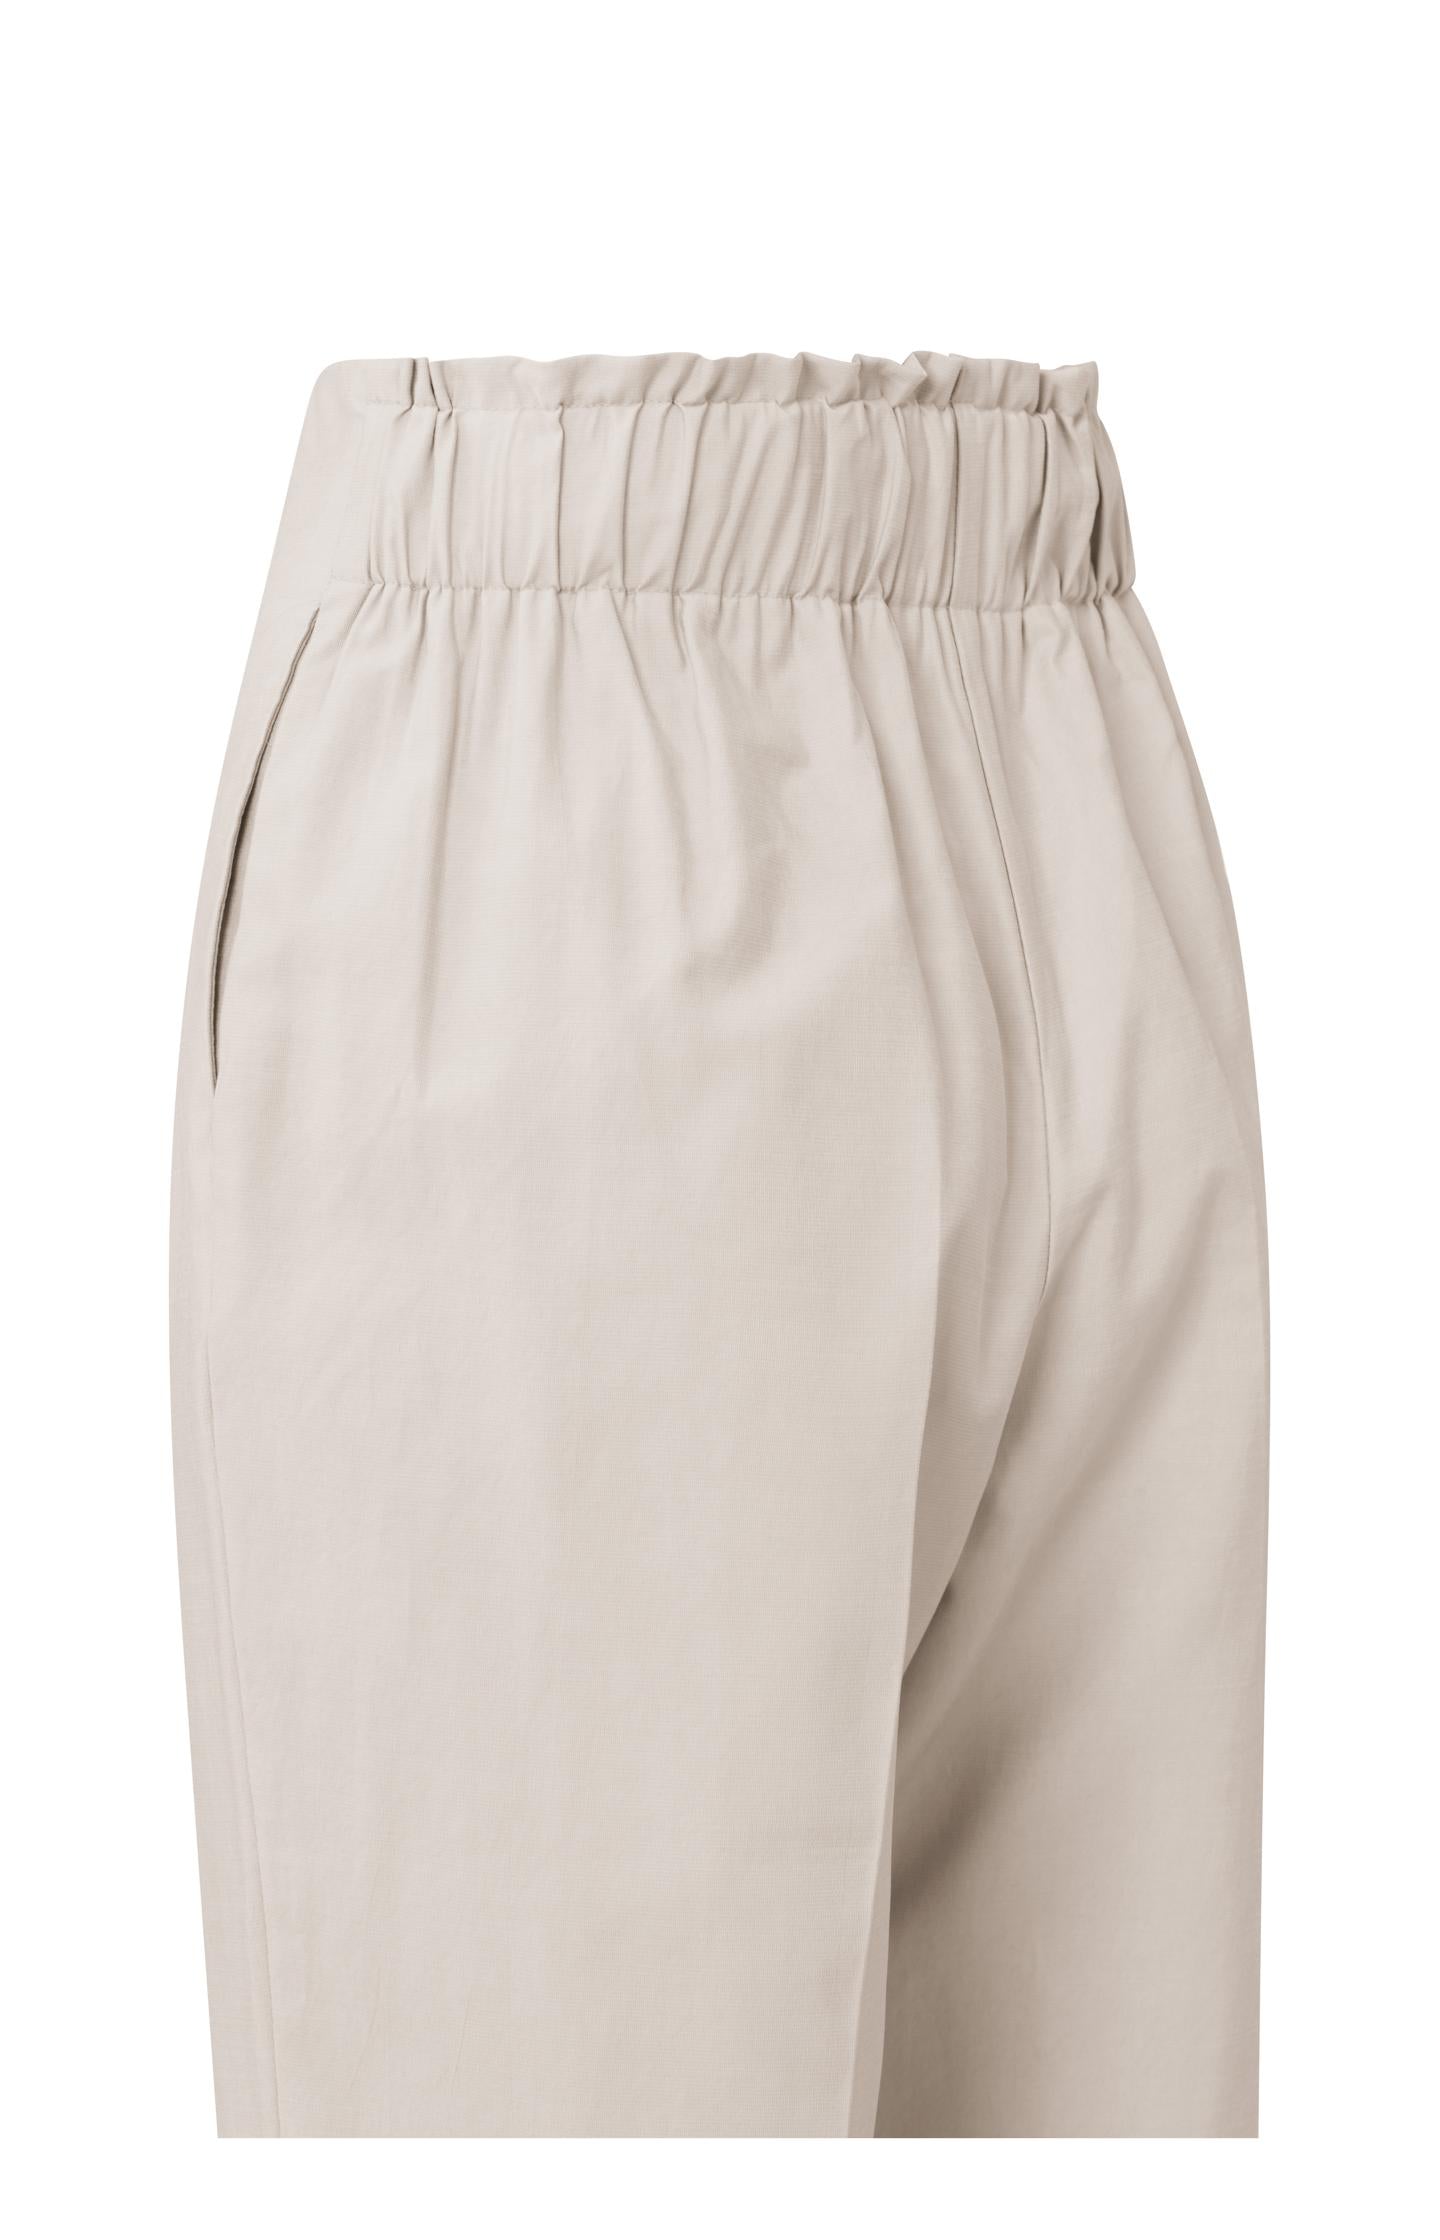 High waist pantalon with zip fly, buttons and pleated detail